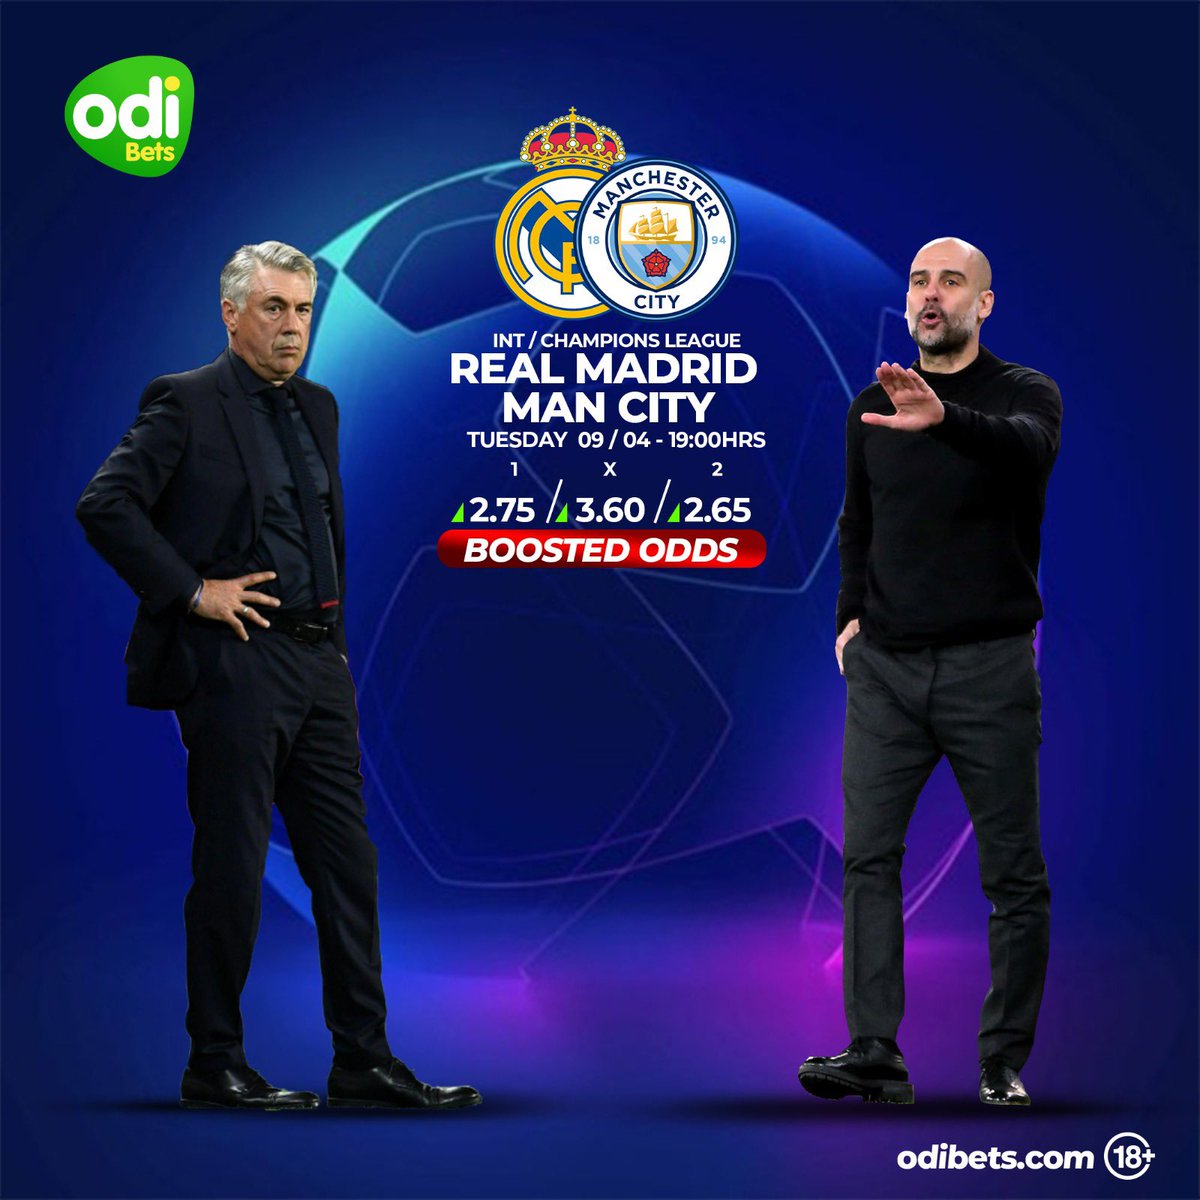 Real Madrid is set to face Manchester City tonight at the Champions league quarter finals 🔥
Who wins? 

We’ve got you covered with our fastest live betting, boosted odds, Cash-back bonuses, fastest payouts and so much more!

 📲 odibets.com.gh 

#BetExtraODinary